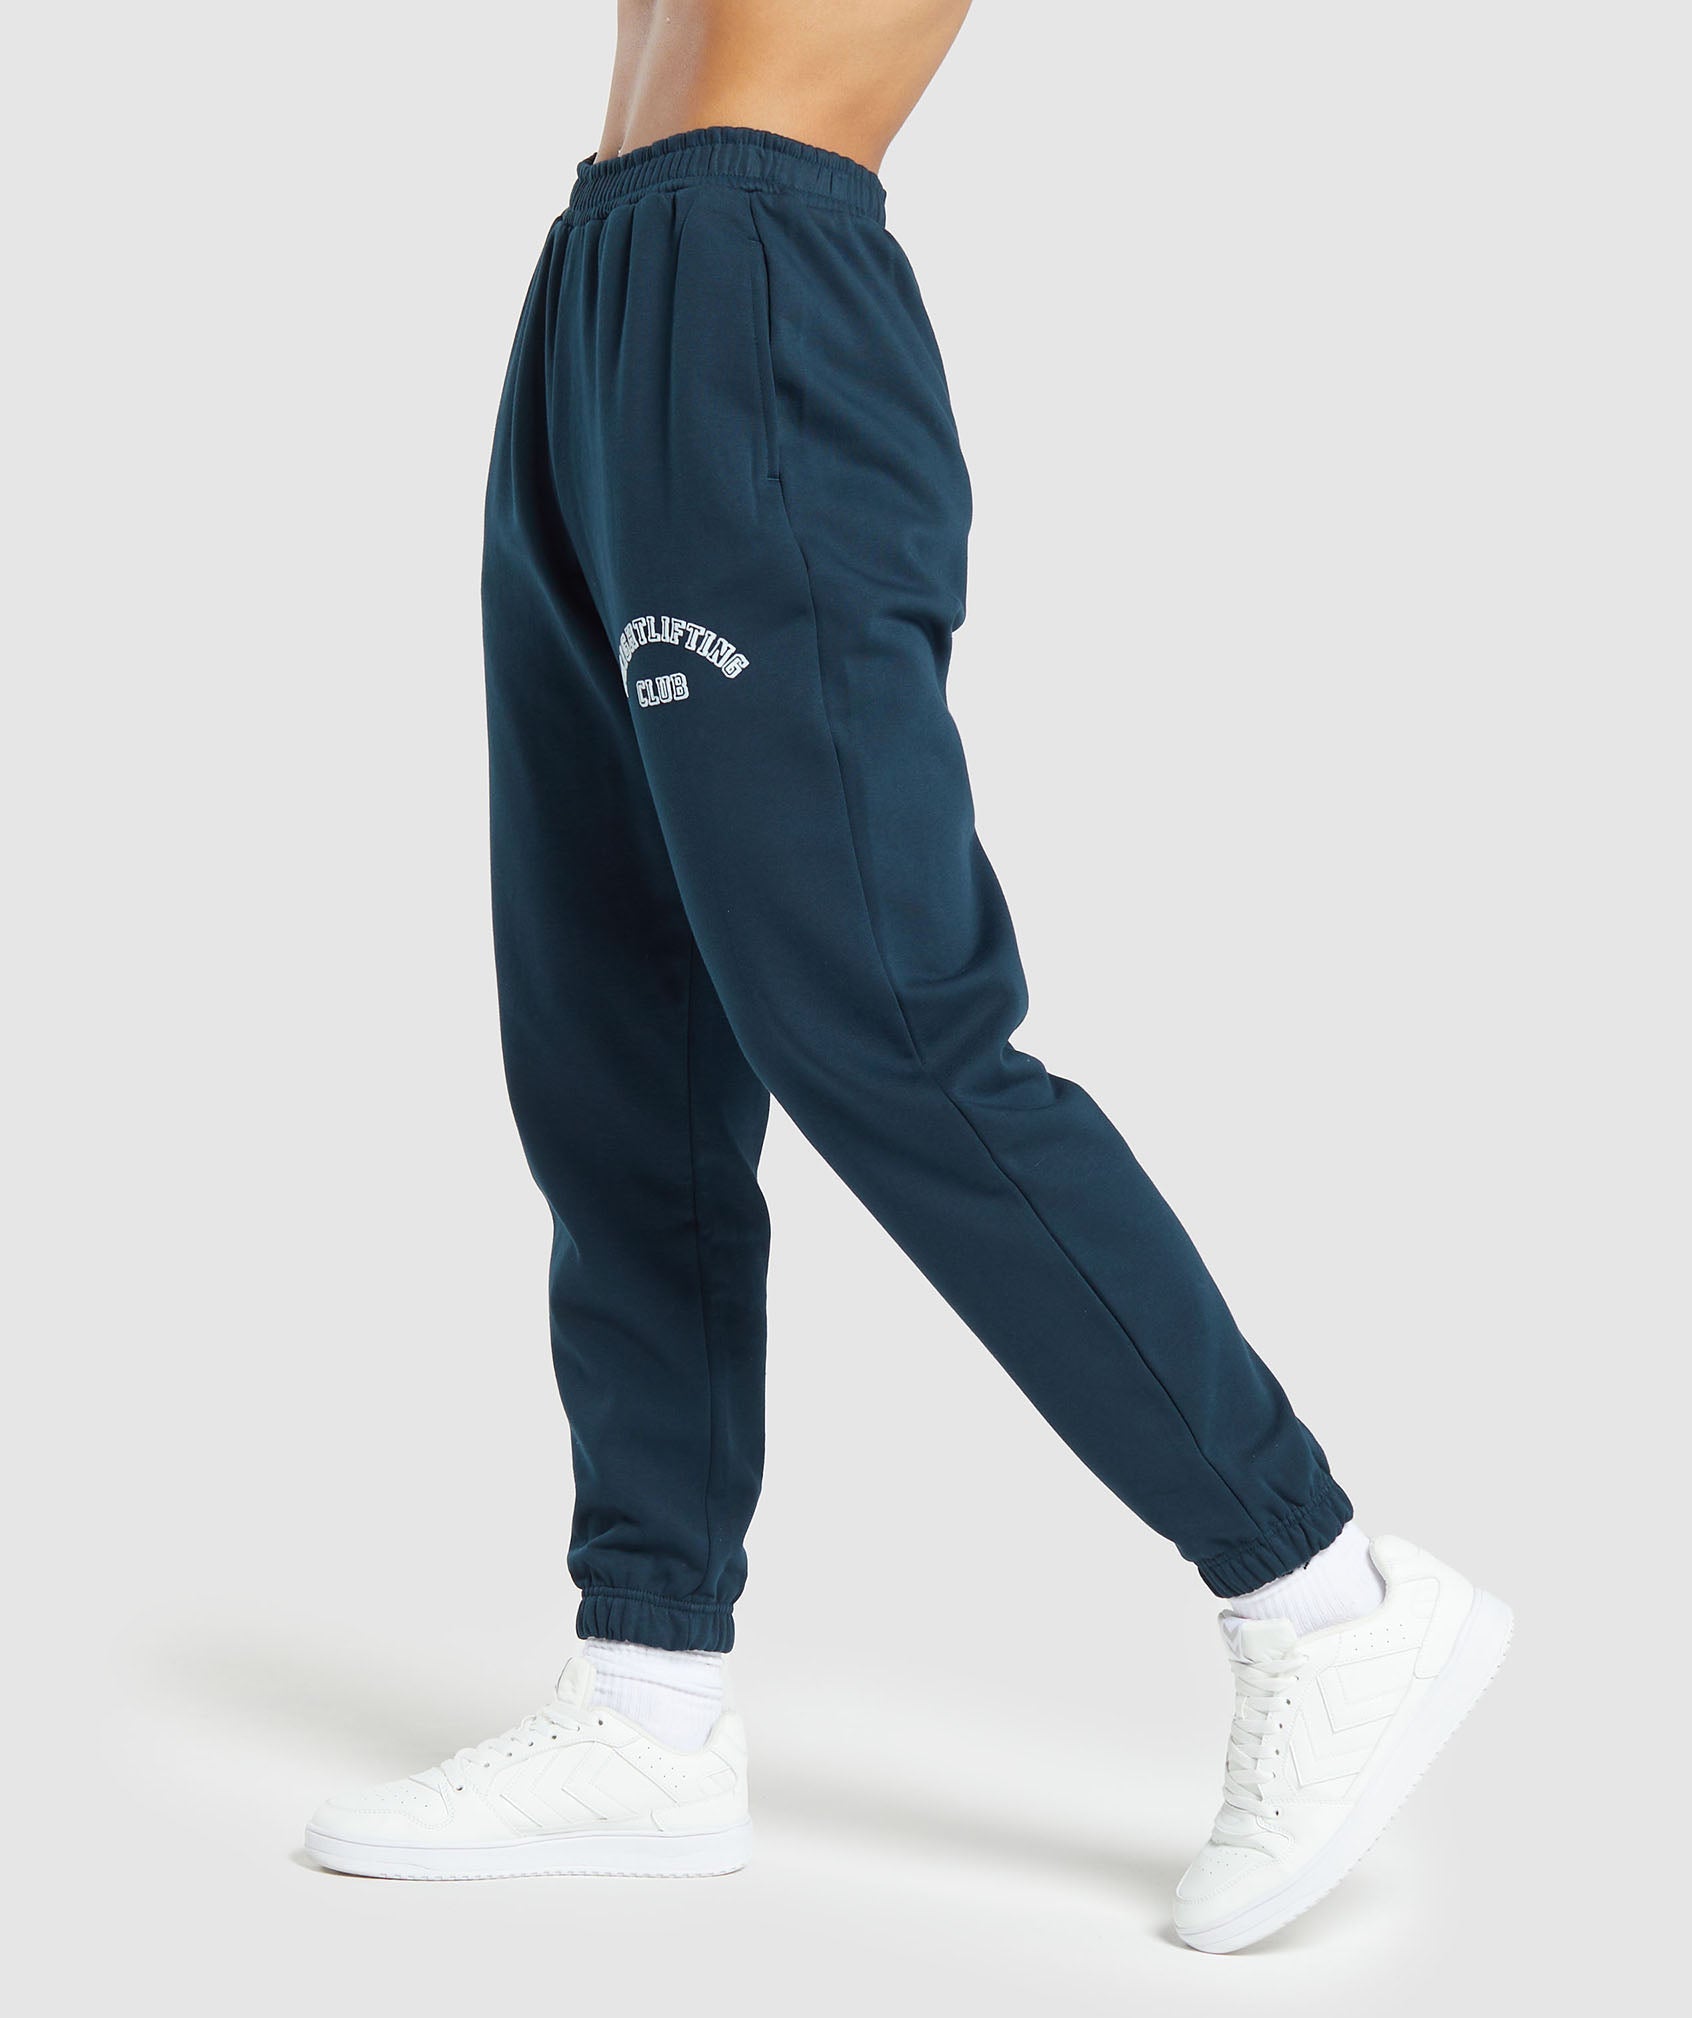 Weightlifting Club Joggers in Navy - view 3